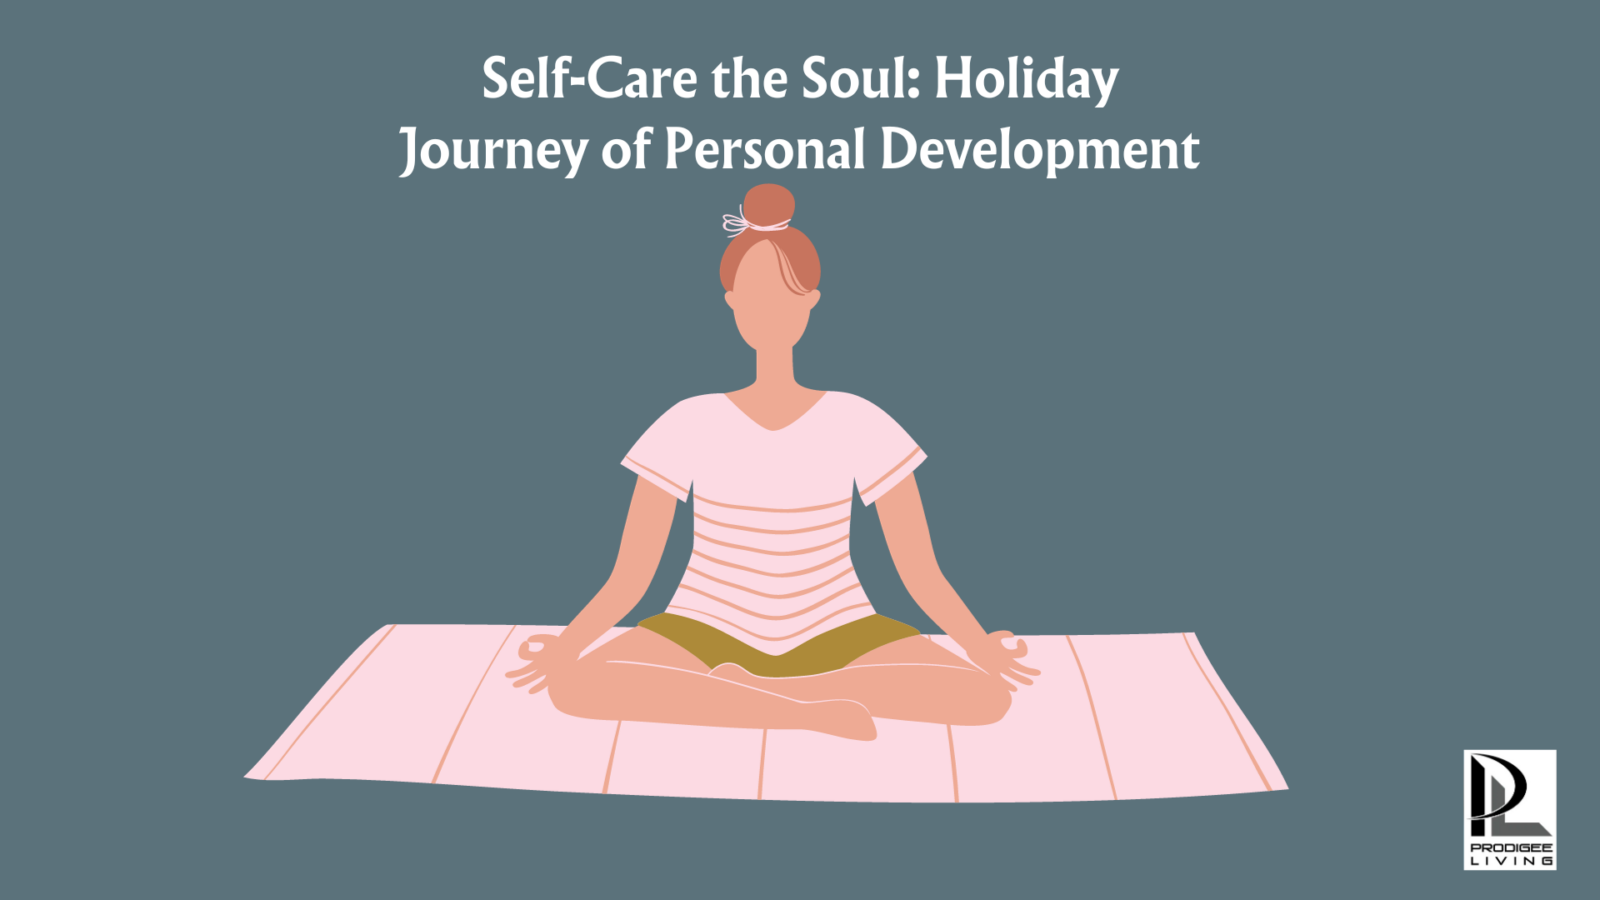 self care the soul: holiday journey of personal development